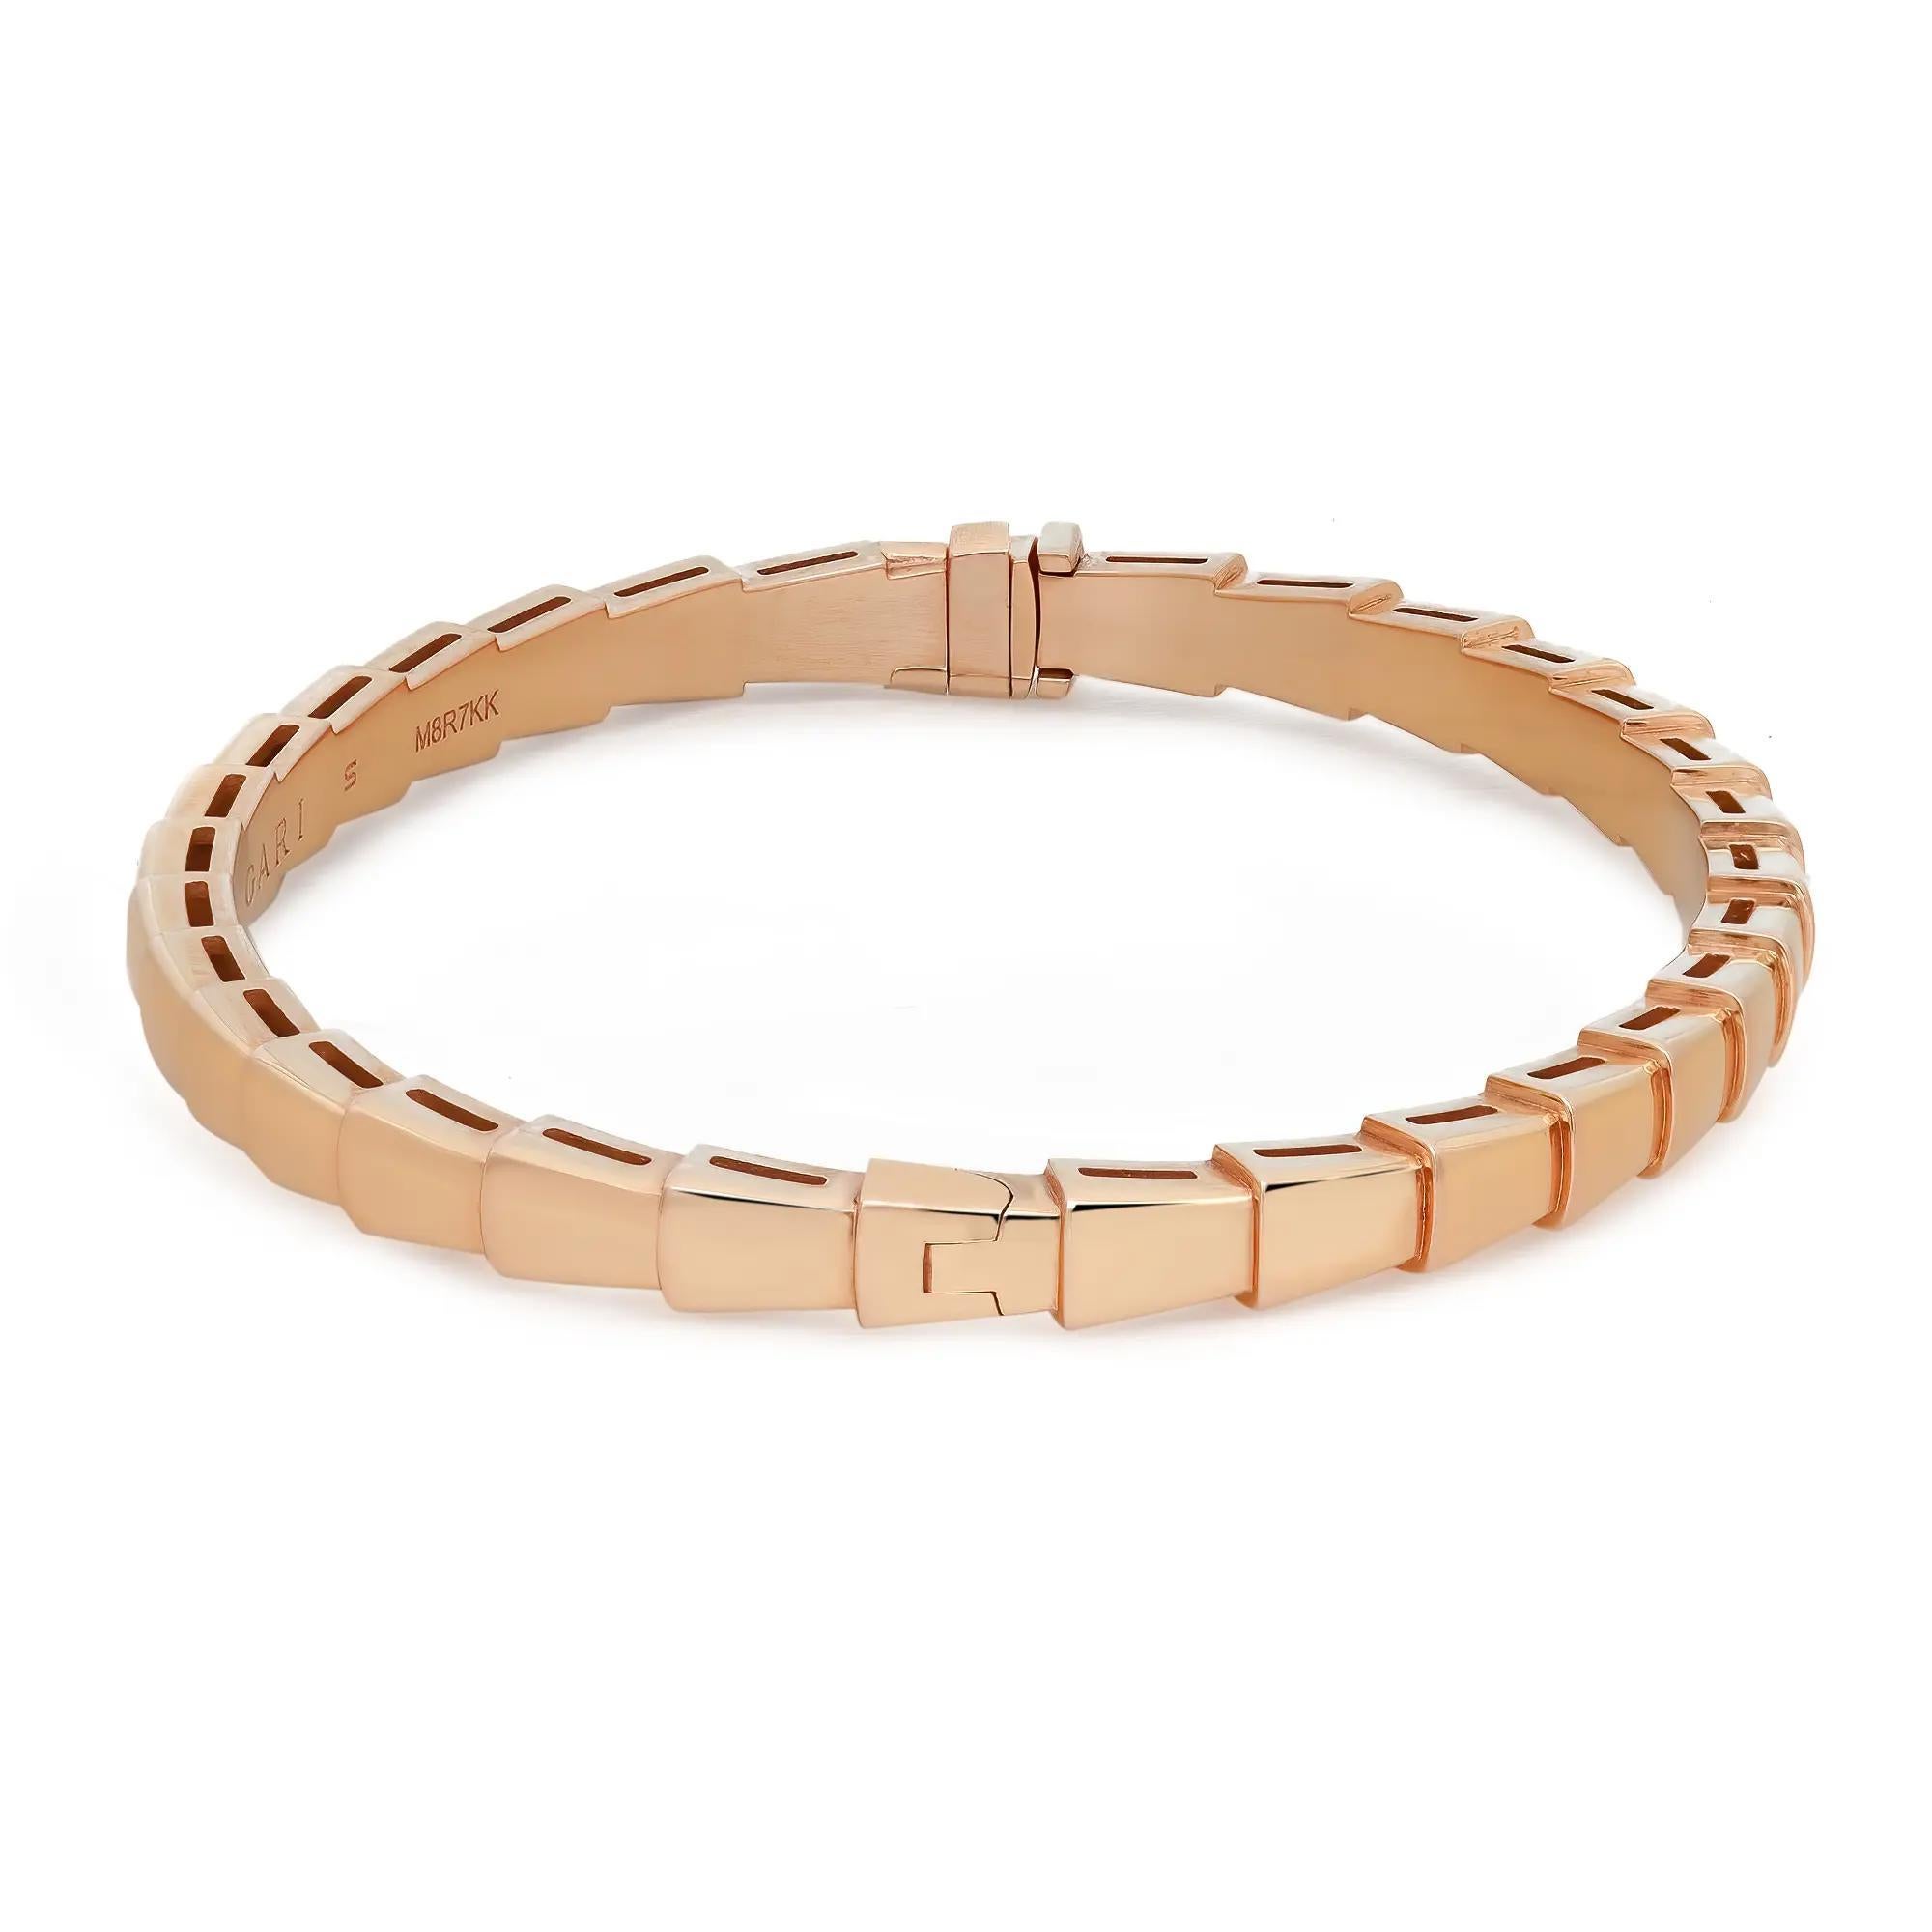 Bvlgari Serpenti Viper bracelet crafted in 18K rose gold. This beautiful jewelry piece coils around the wrist and stands out thanks to the precious beauty of the scales and the distinctive sinuosity of the snake. Secured with box closure. Super